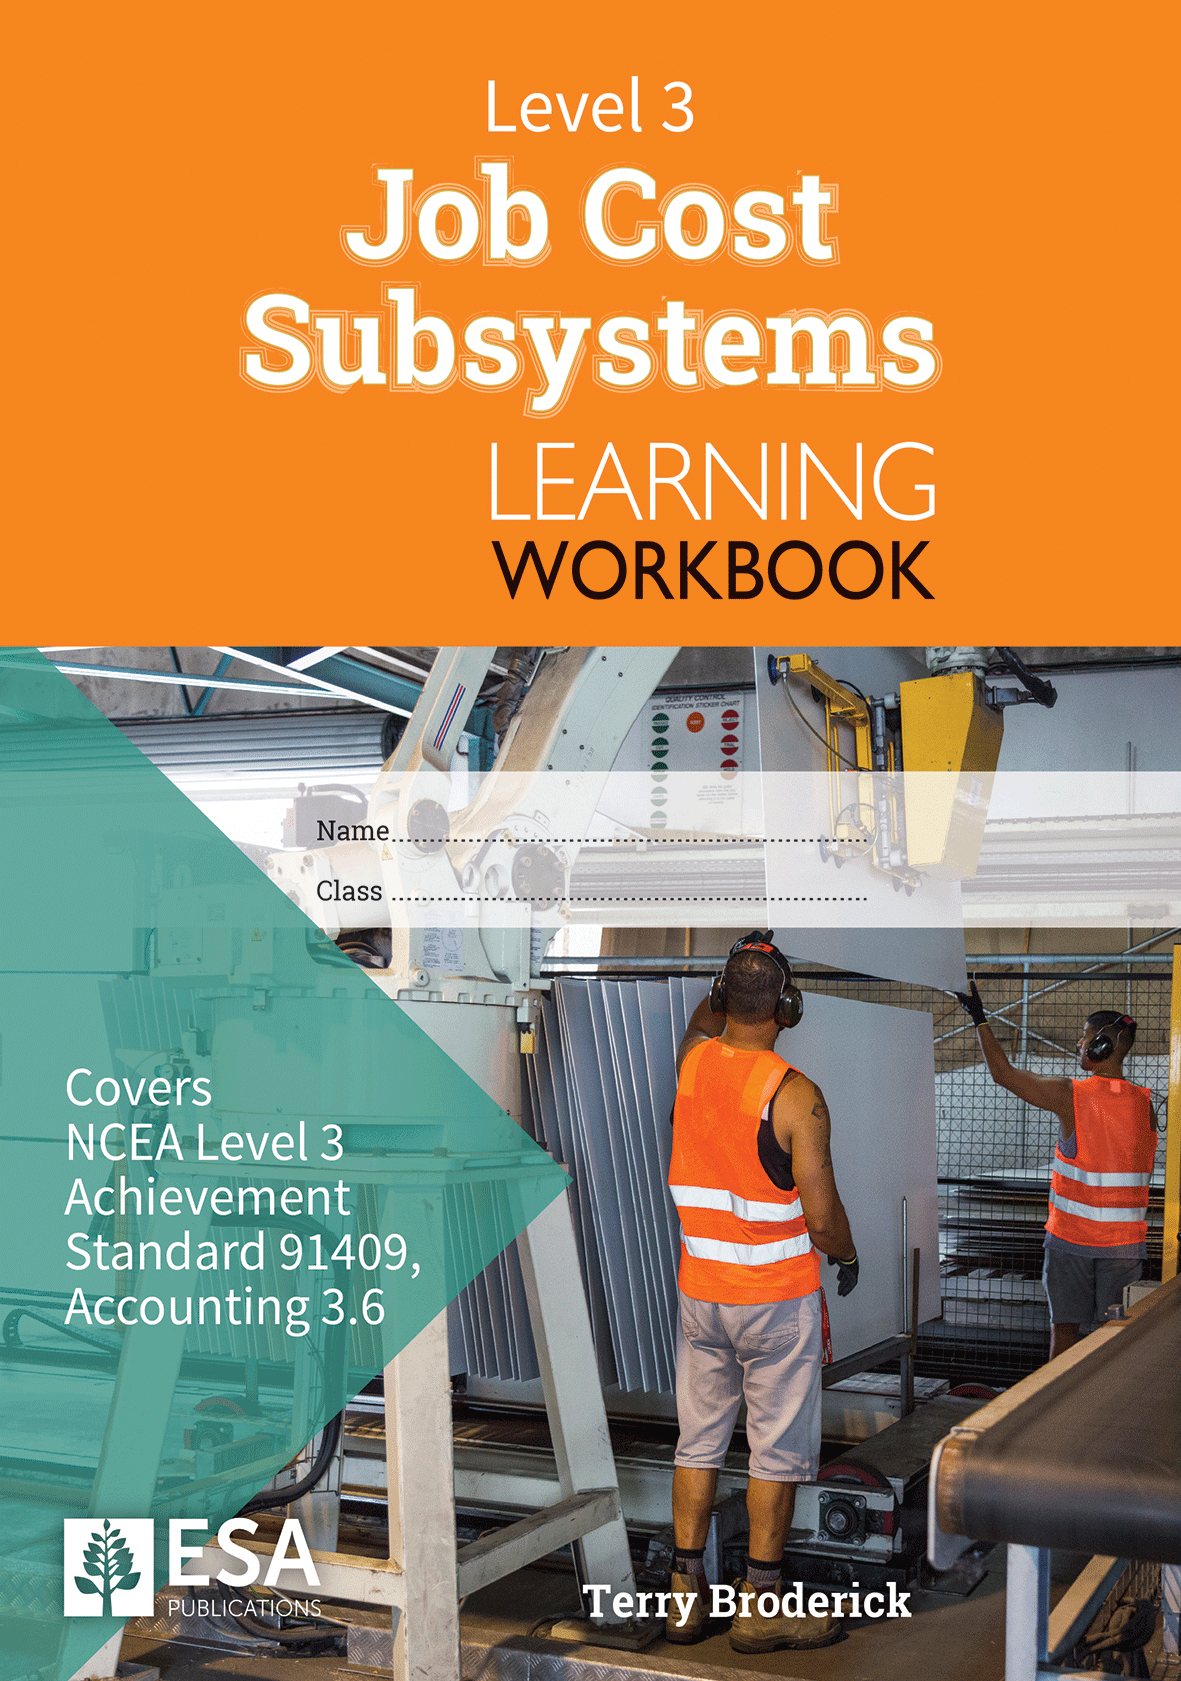 Level 3 Job Cost Subsystems 3.6 Learning Workbook